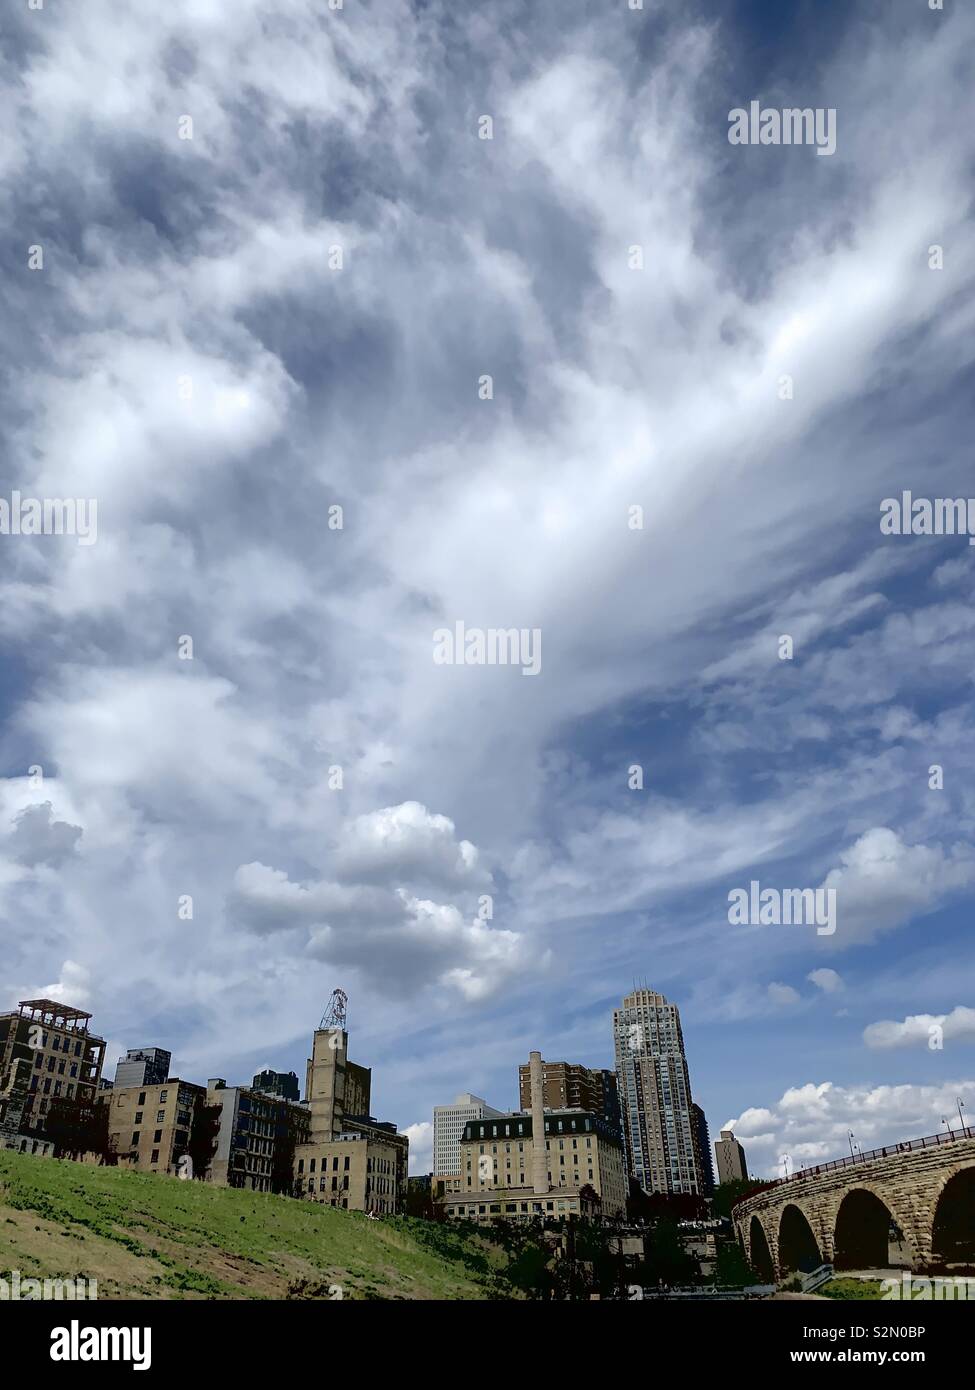 Cloudy spring afternoon with a city in the foreground. Stock Photo